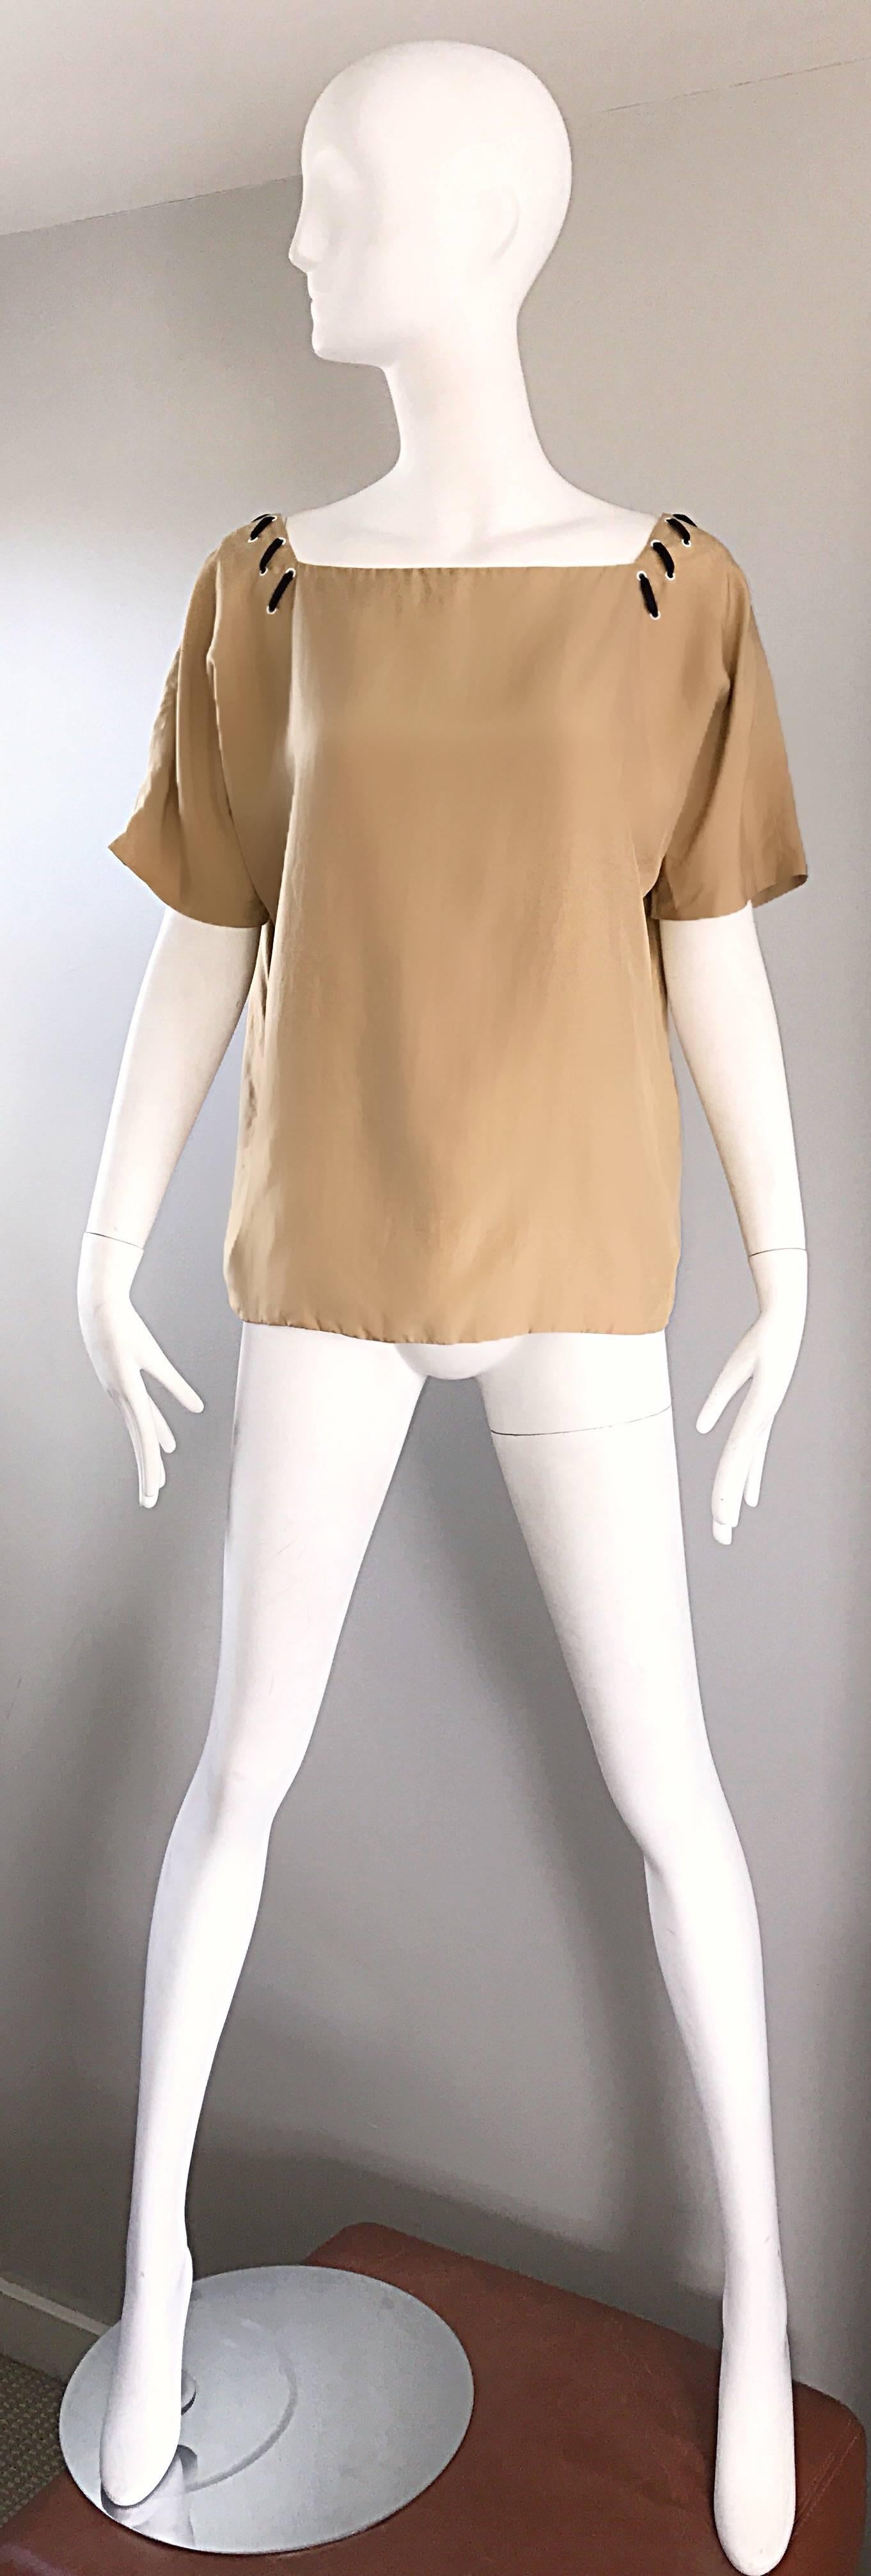 Chic 1990s FENDI, by KARL LAGERFELD tan silk tunic top! Luxurious soft fine silk feels great against the skin. Great with shorts, jeans or trousers. In great condition. Made in Italy.
Marked Size EU 42
Measurements:
Up to 44 inch bust
Up to 38 inch